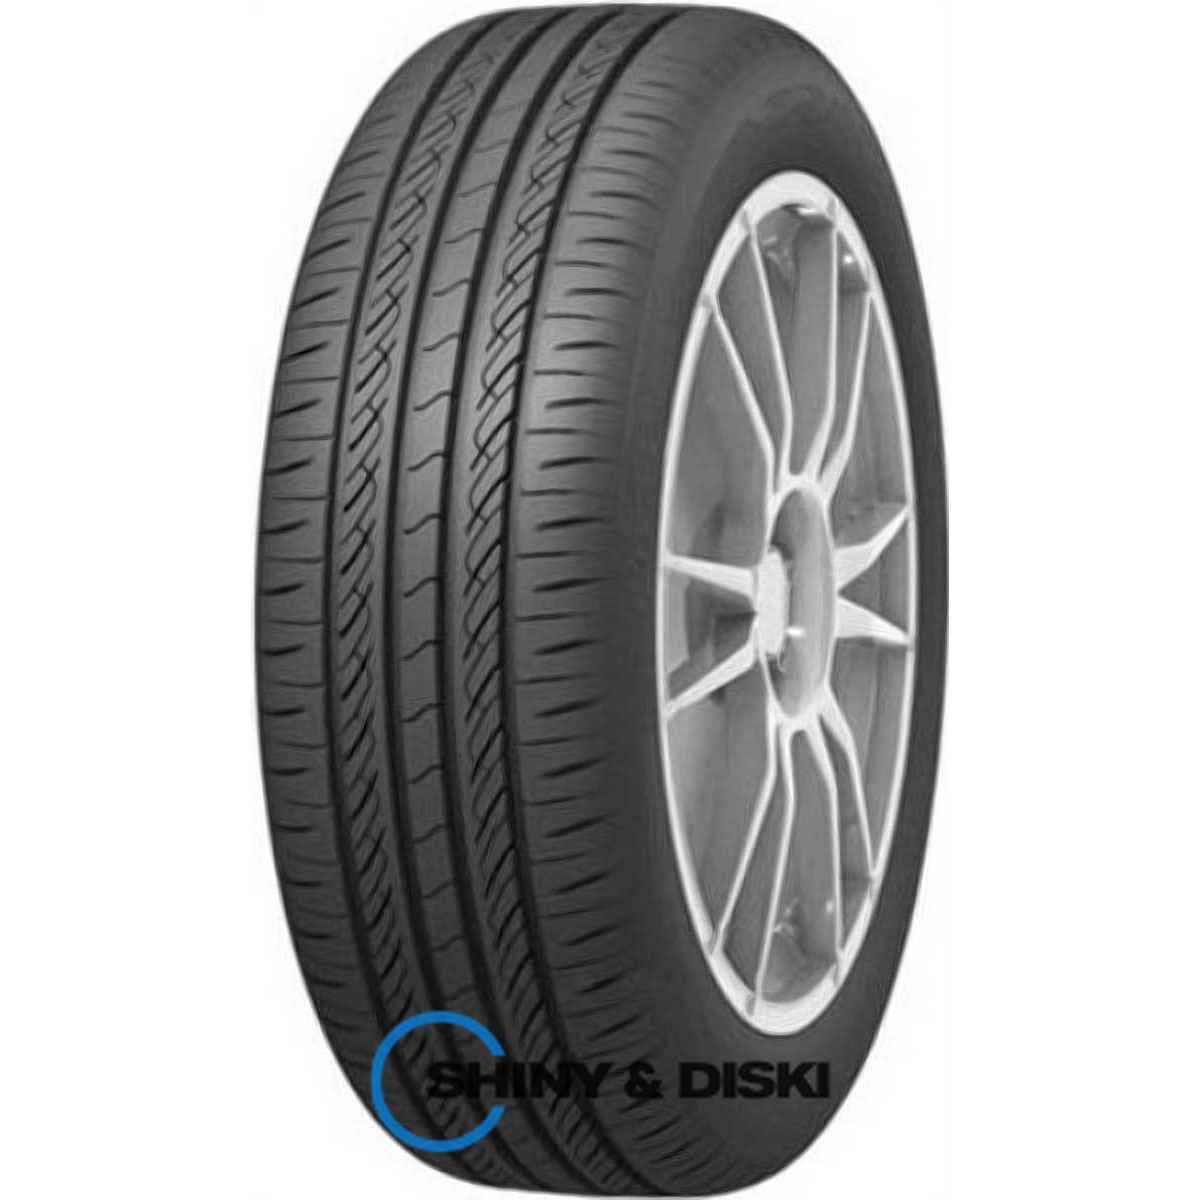 infinity ecosis 185/60 r15 88h